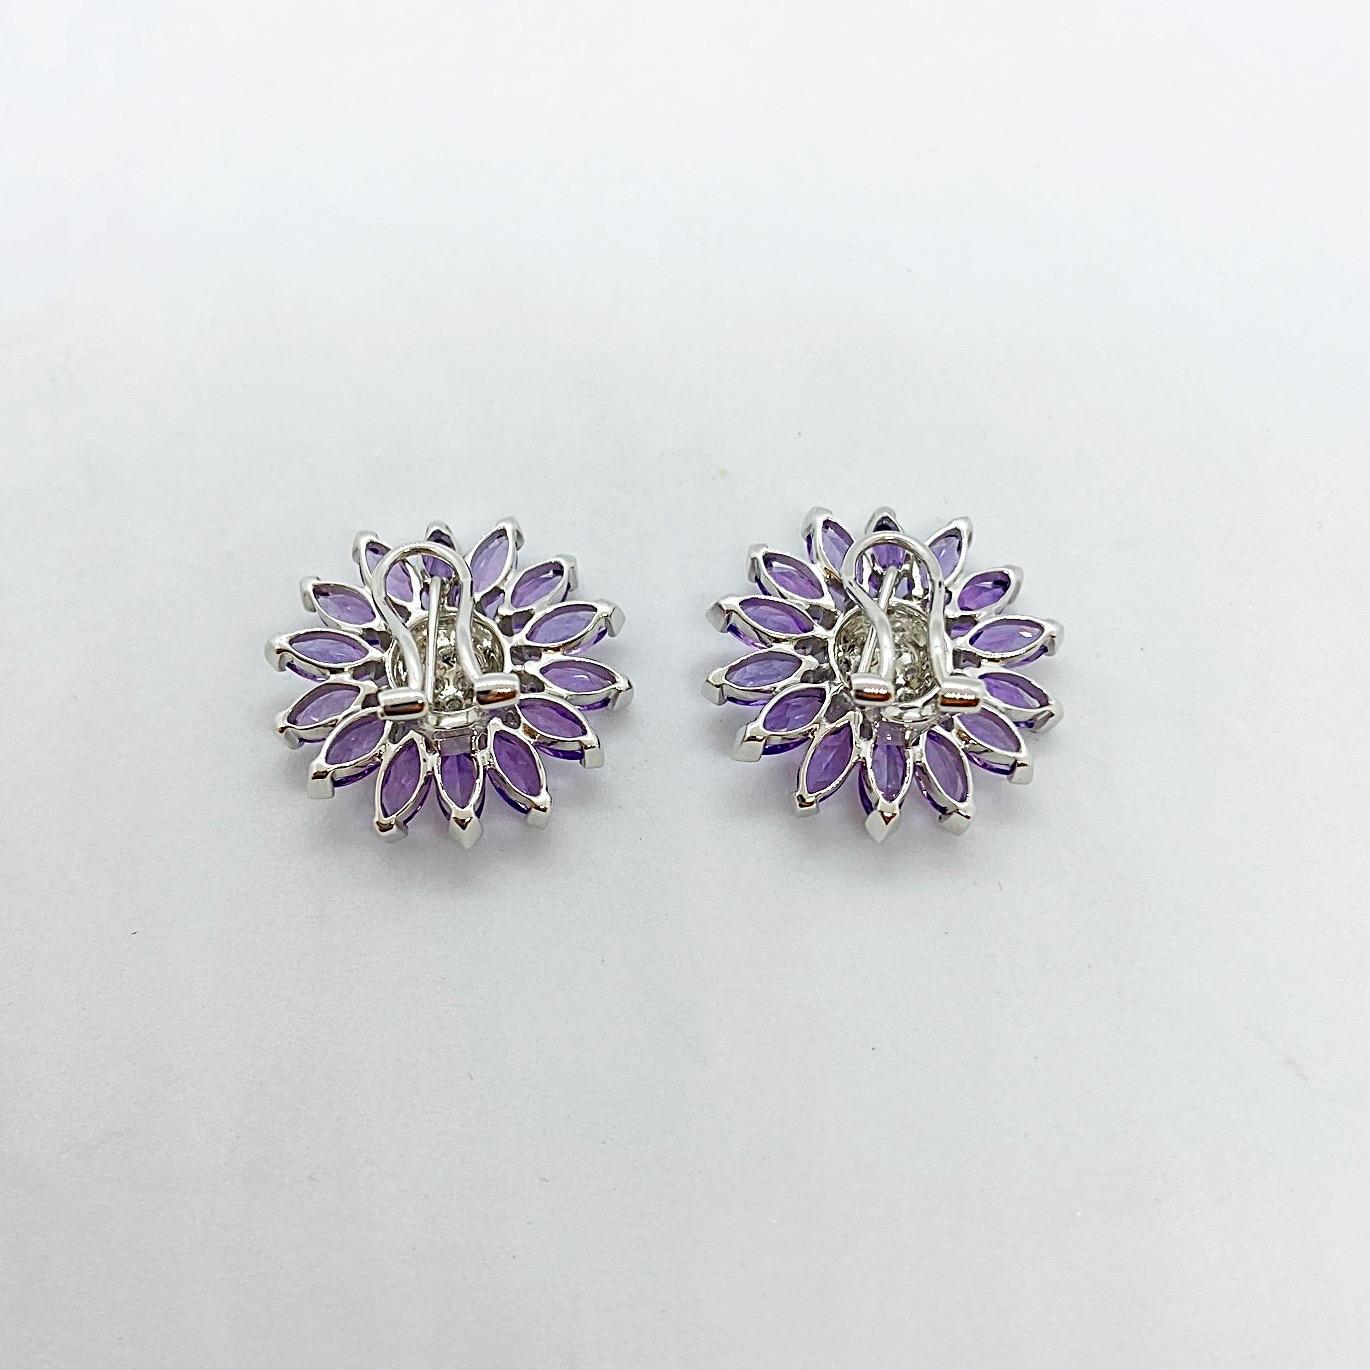 Contemporary 18 Karat White Gold & 5.83 Carat Amethyst Sunflower Earrings with Diamond Center For Sale